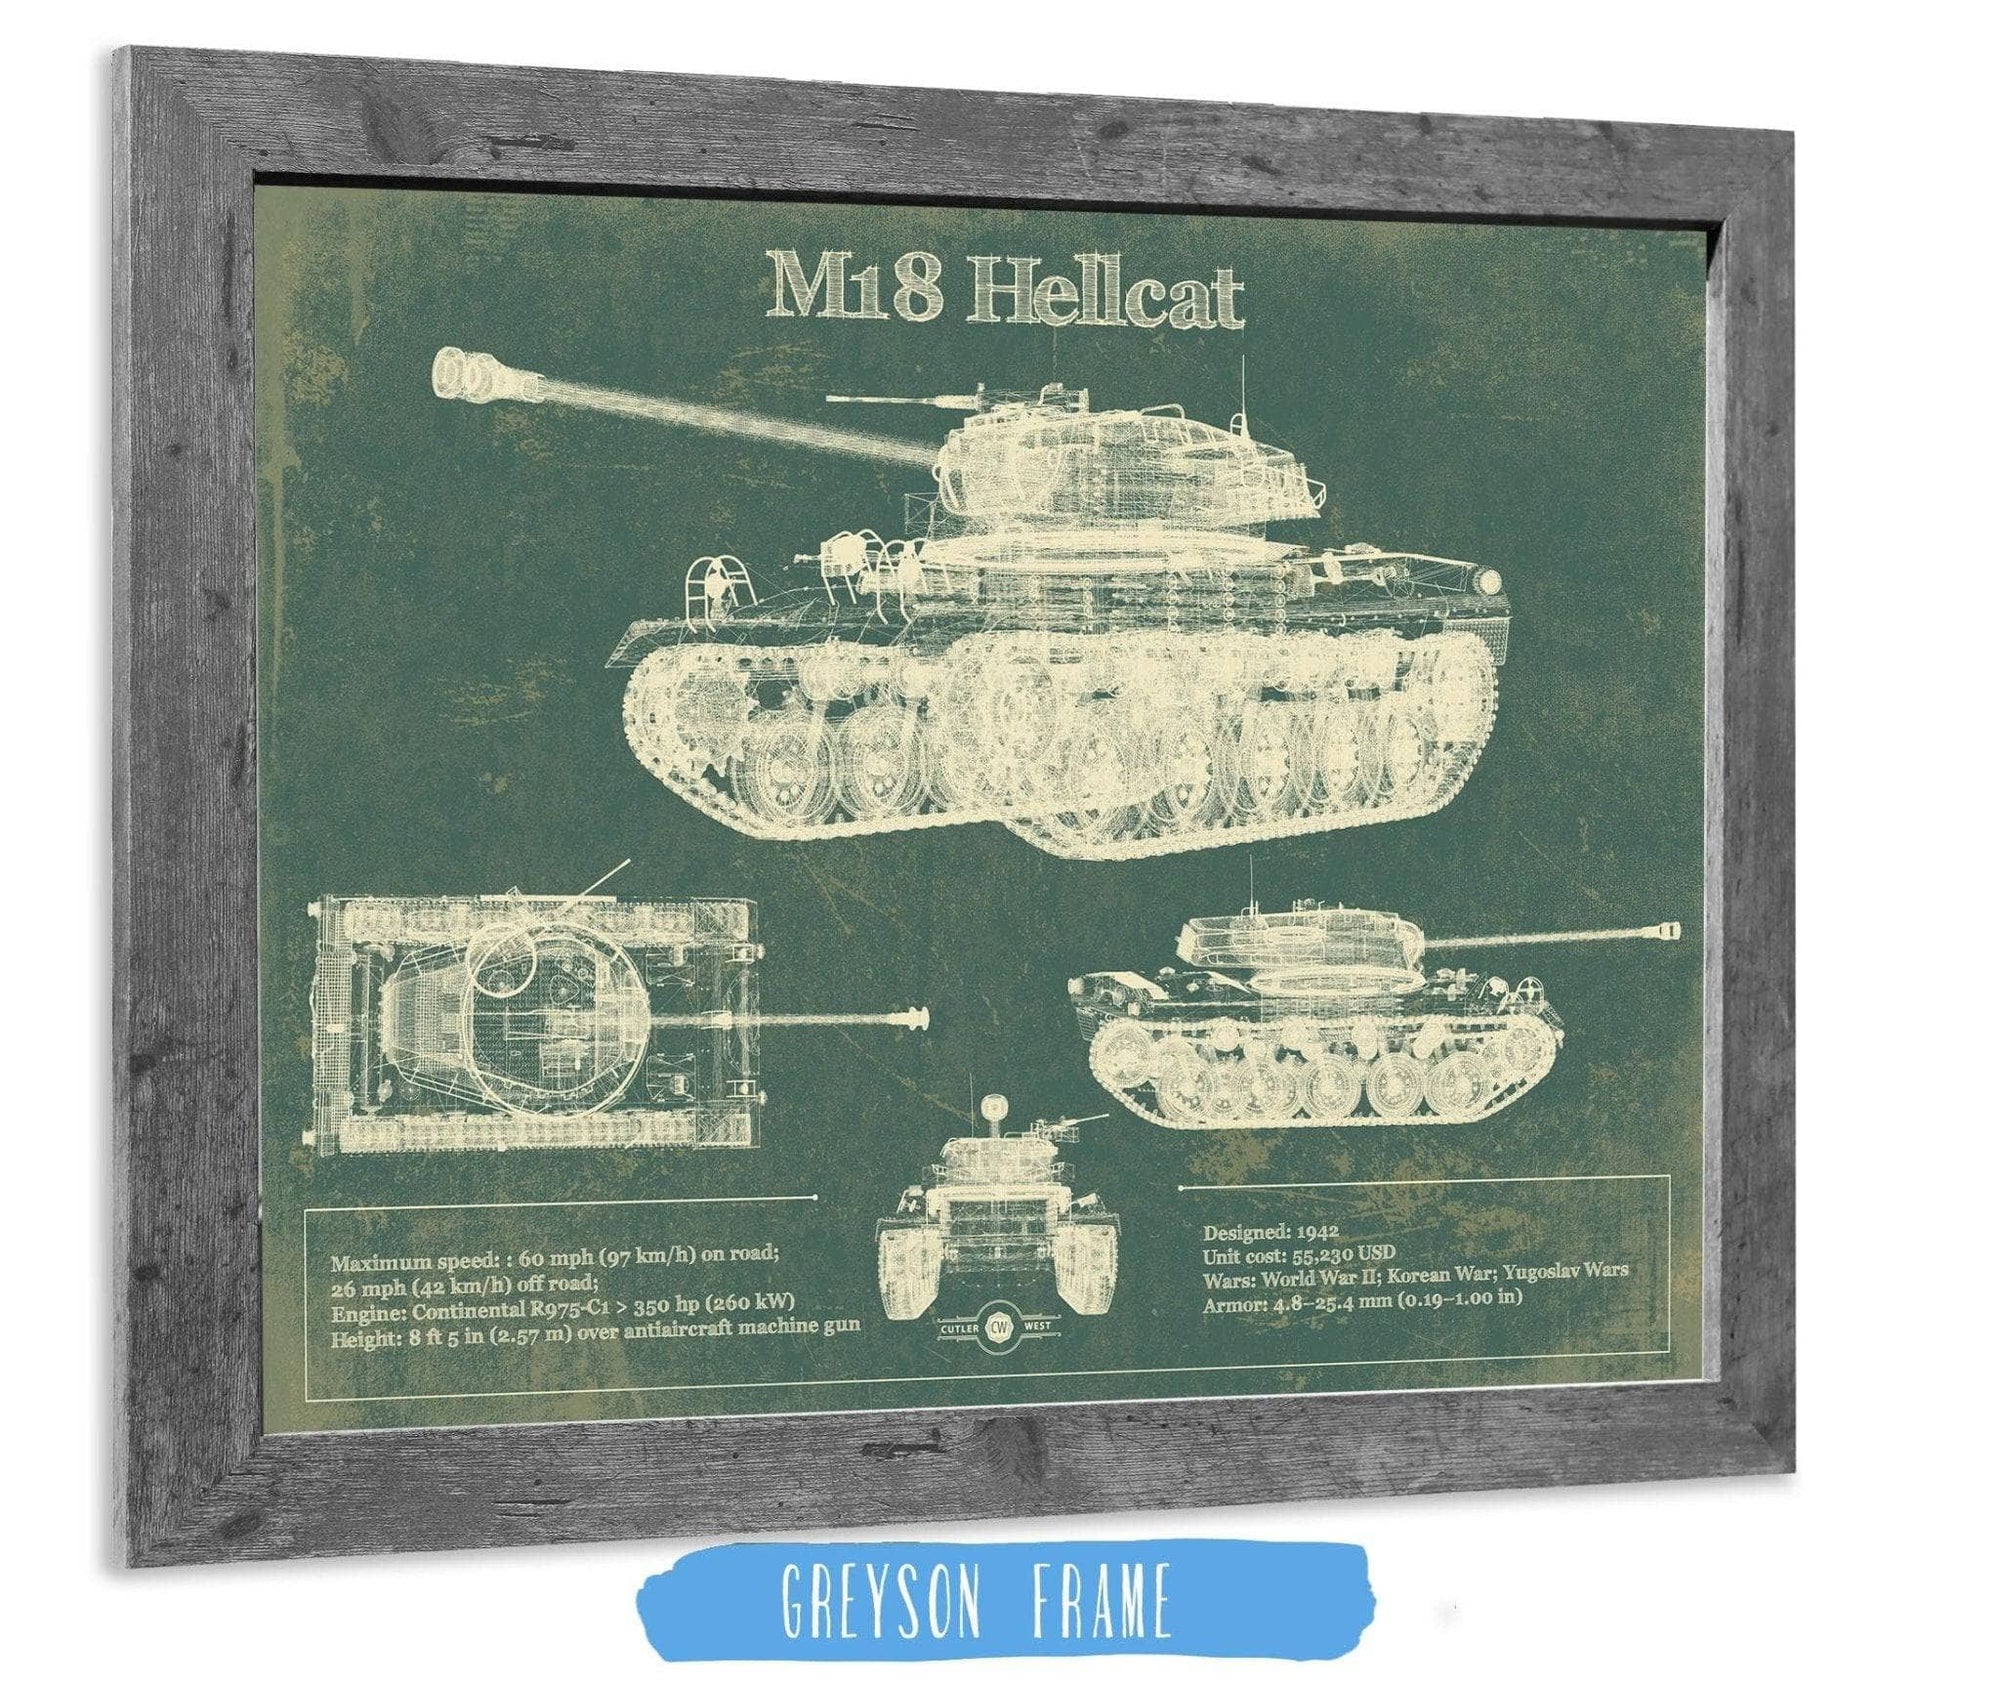 Cutler West Military Weapons Collection 14" x 11" / Greyson Frame M18 Hellcat Army Color Vintage Blueprint Print 845000225_64715